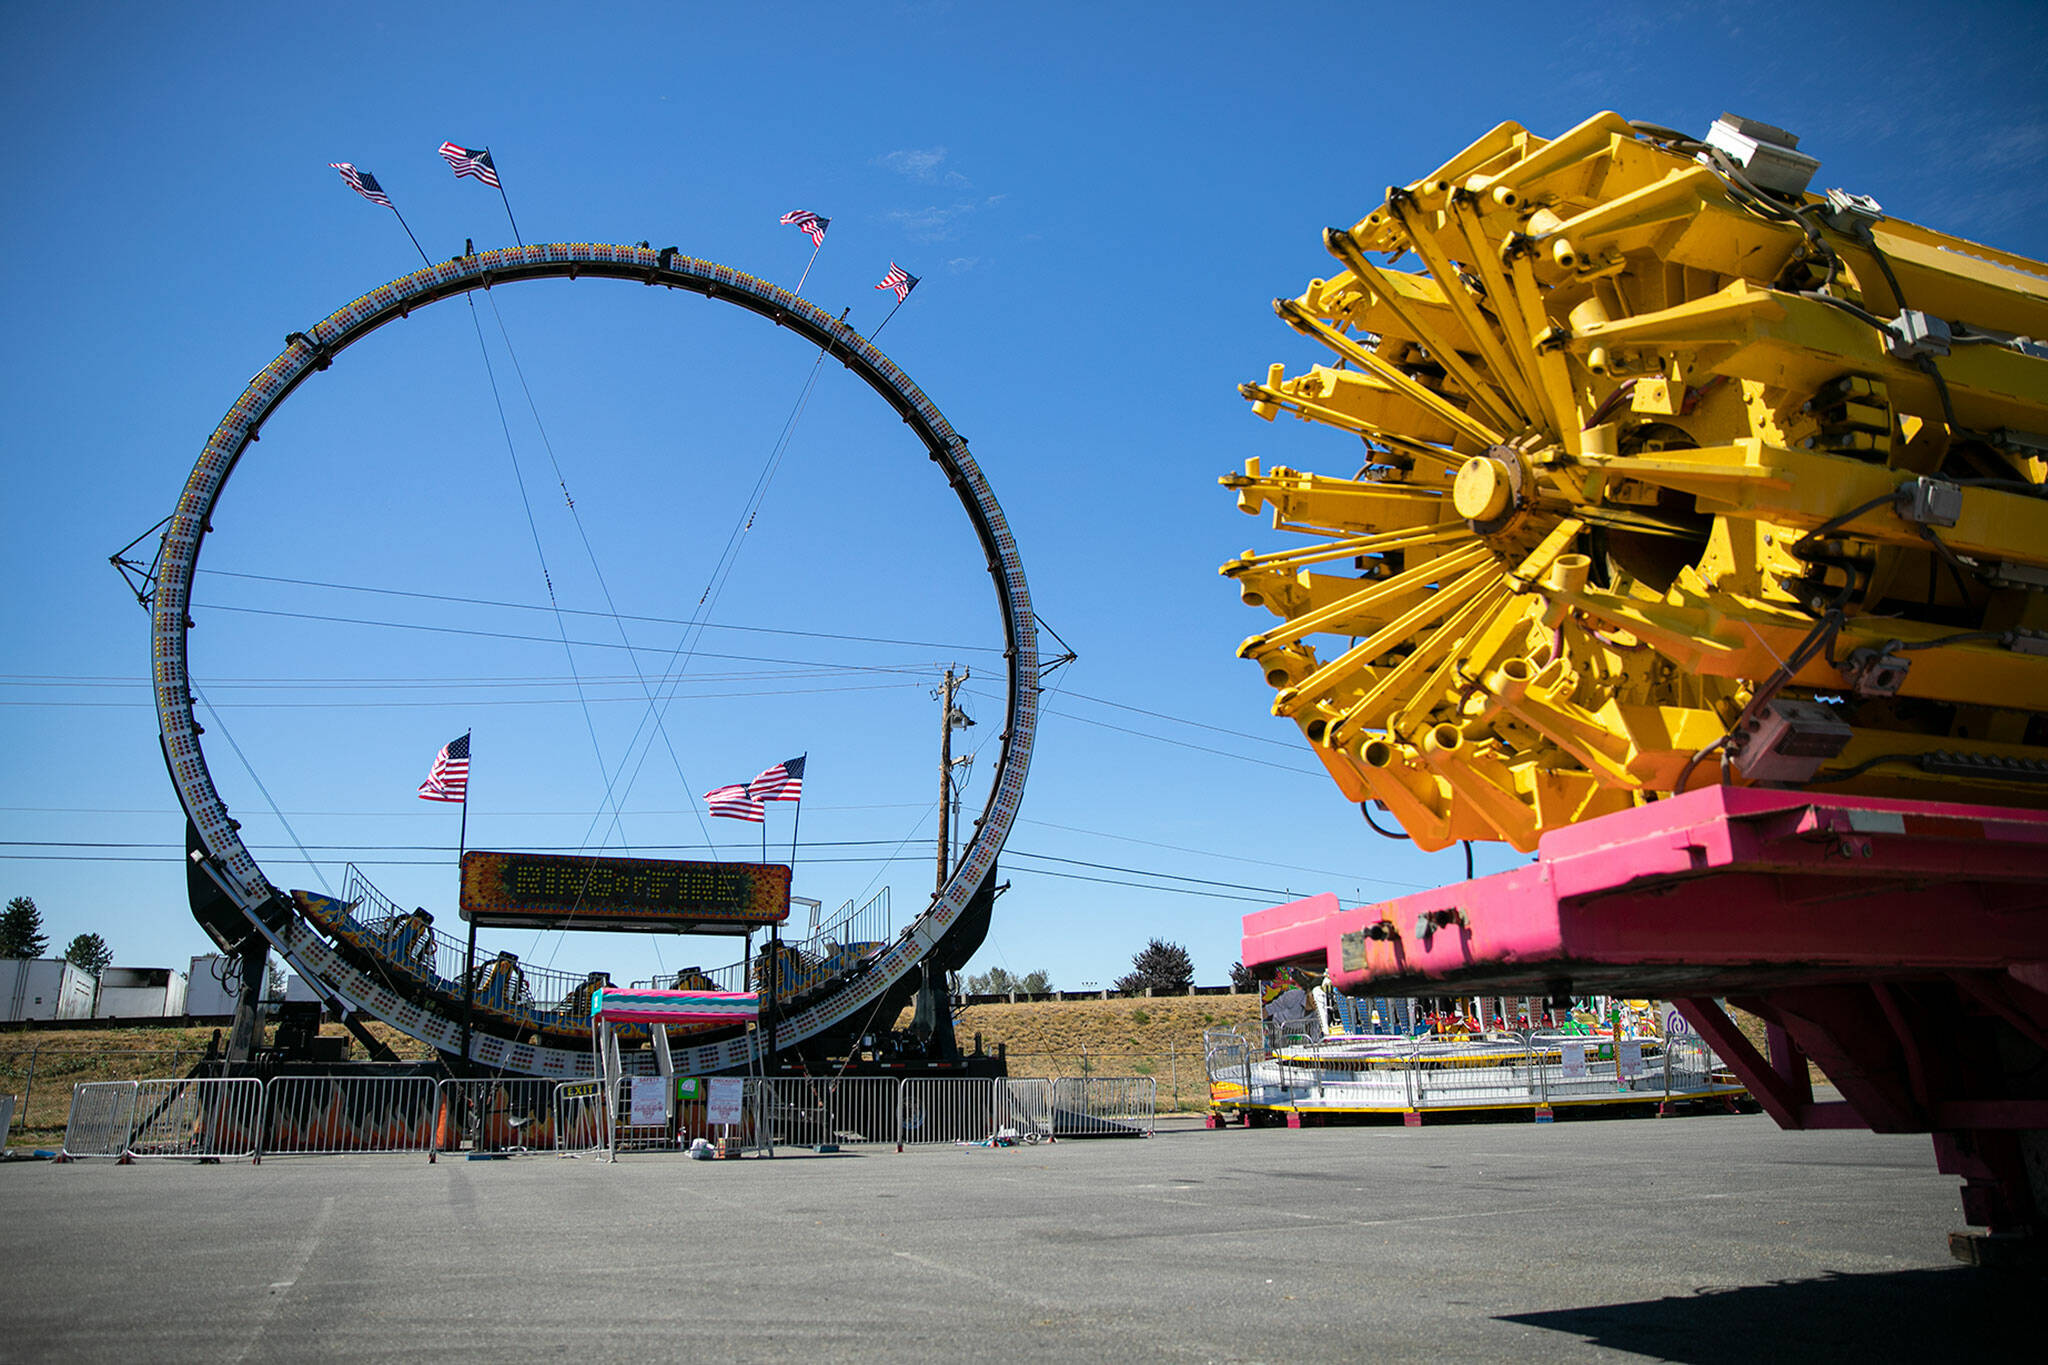 The Ring of Fire is set up as other rides are yet to be installed as the state fair approaches Monday, at the Evergreen State Fairgrounds in Monroe. (Ryan Berry / The Herald)